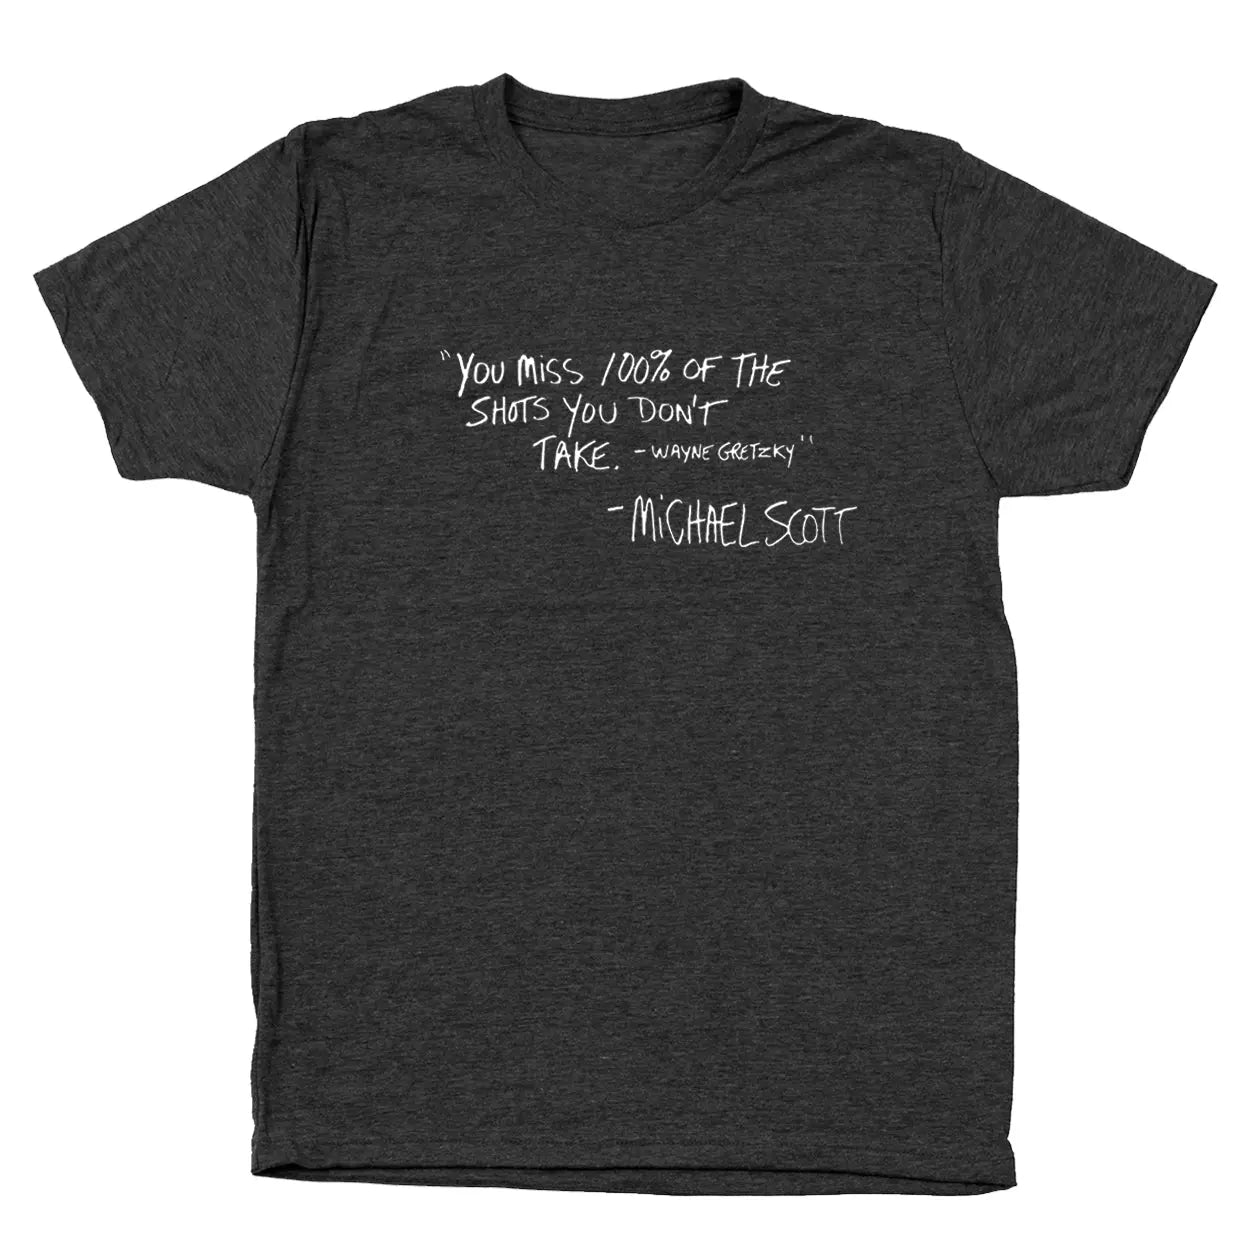 100% Of The Shots You Don't Take Tshirt - Donkey Tees